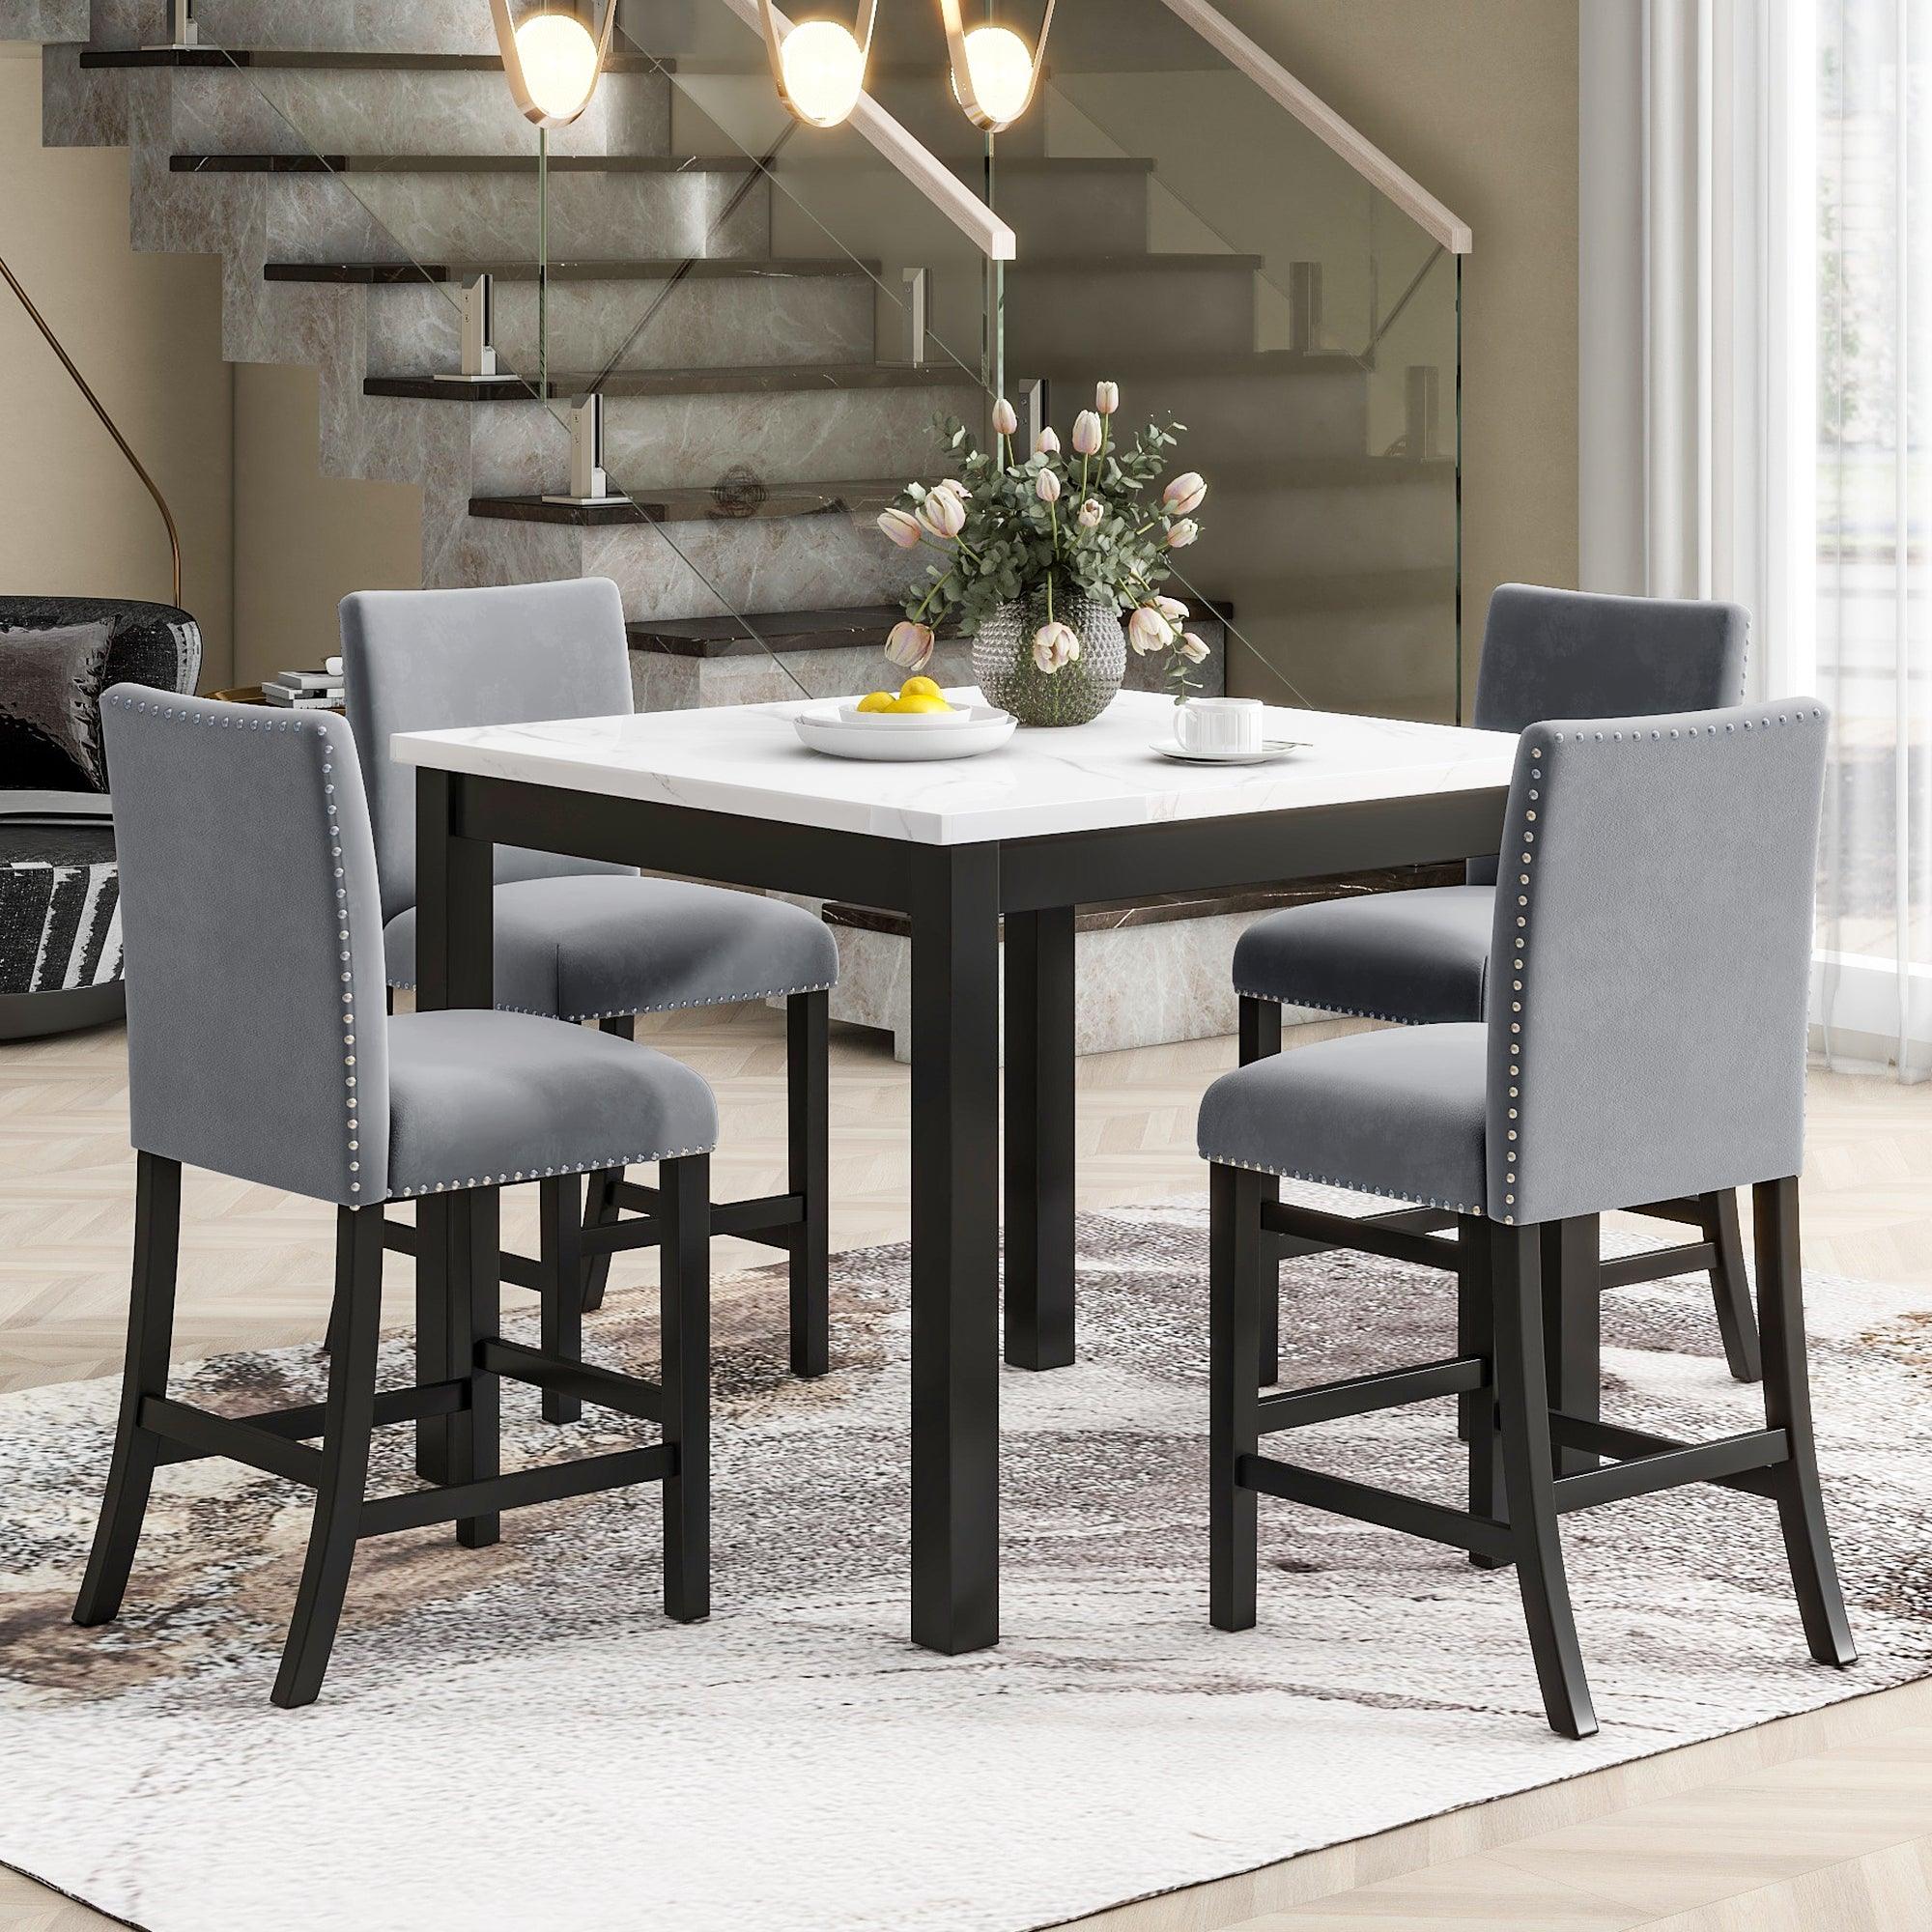 🆓🚛 5-Piece Counter Height Dining Table Set, 1 Faux Marble Top Dining Table & 4 Velvet-Upholstered Chairs, Gray